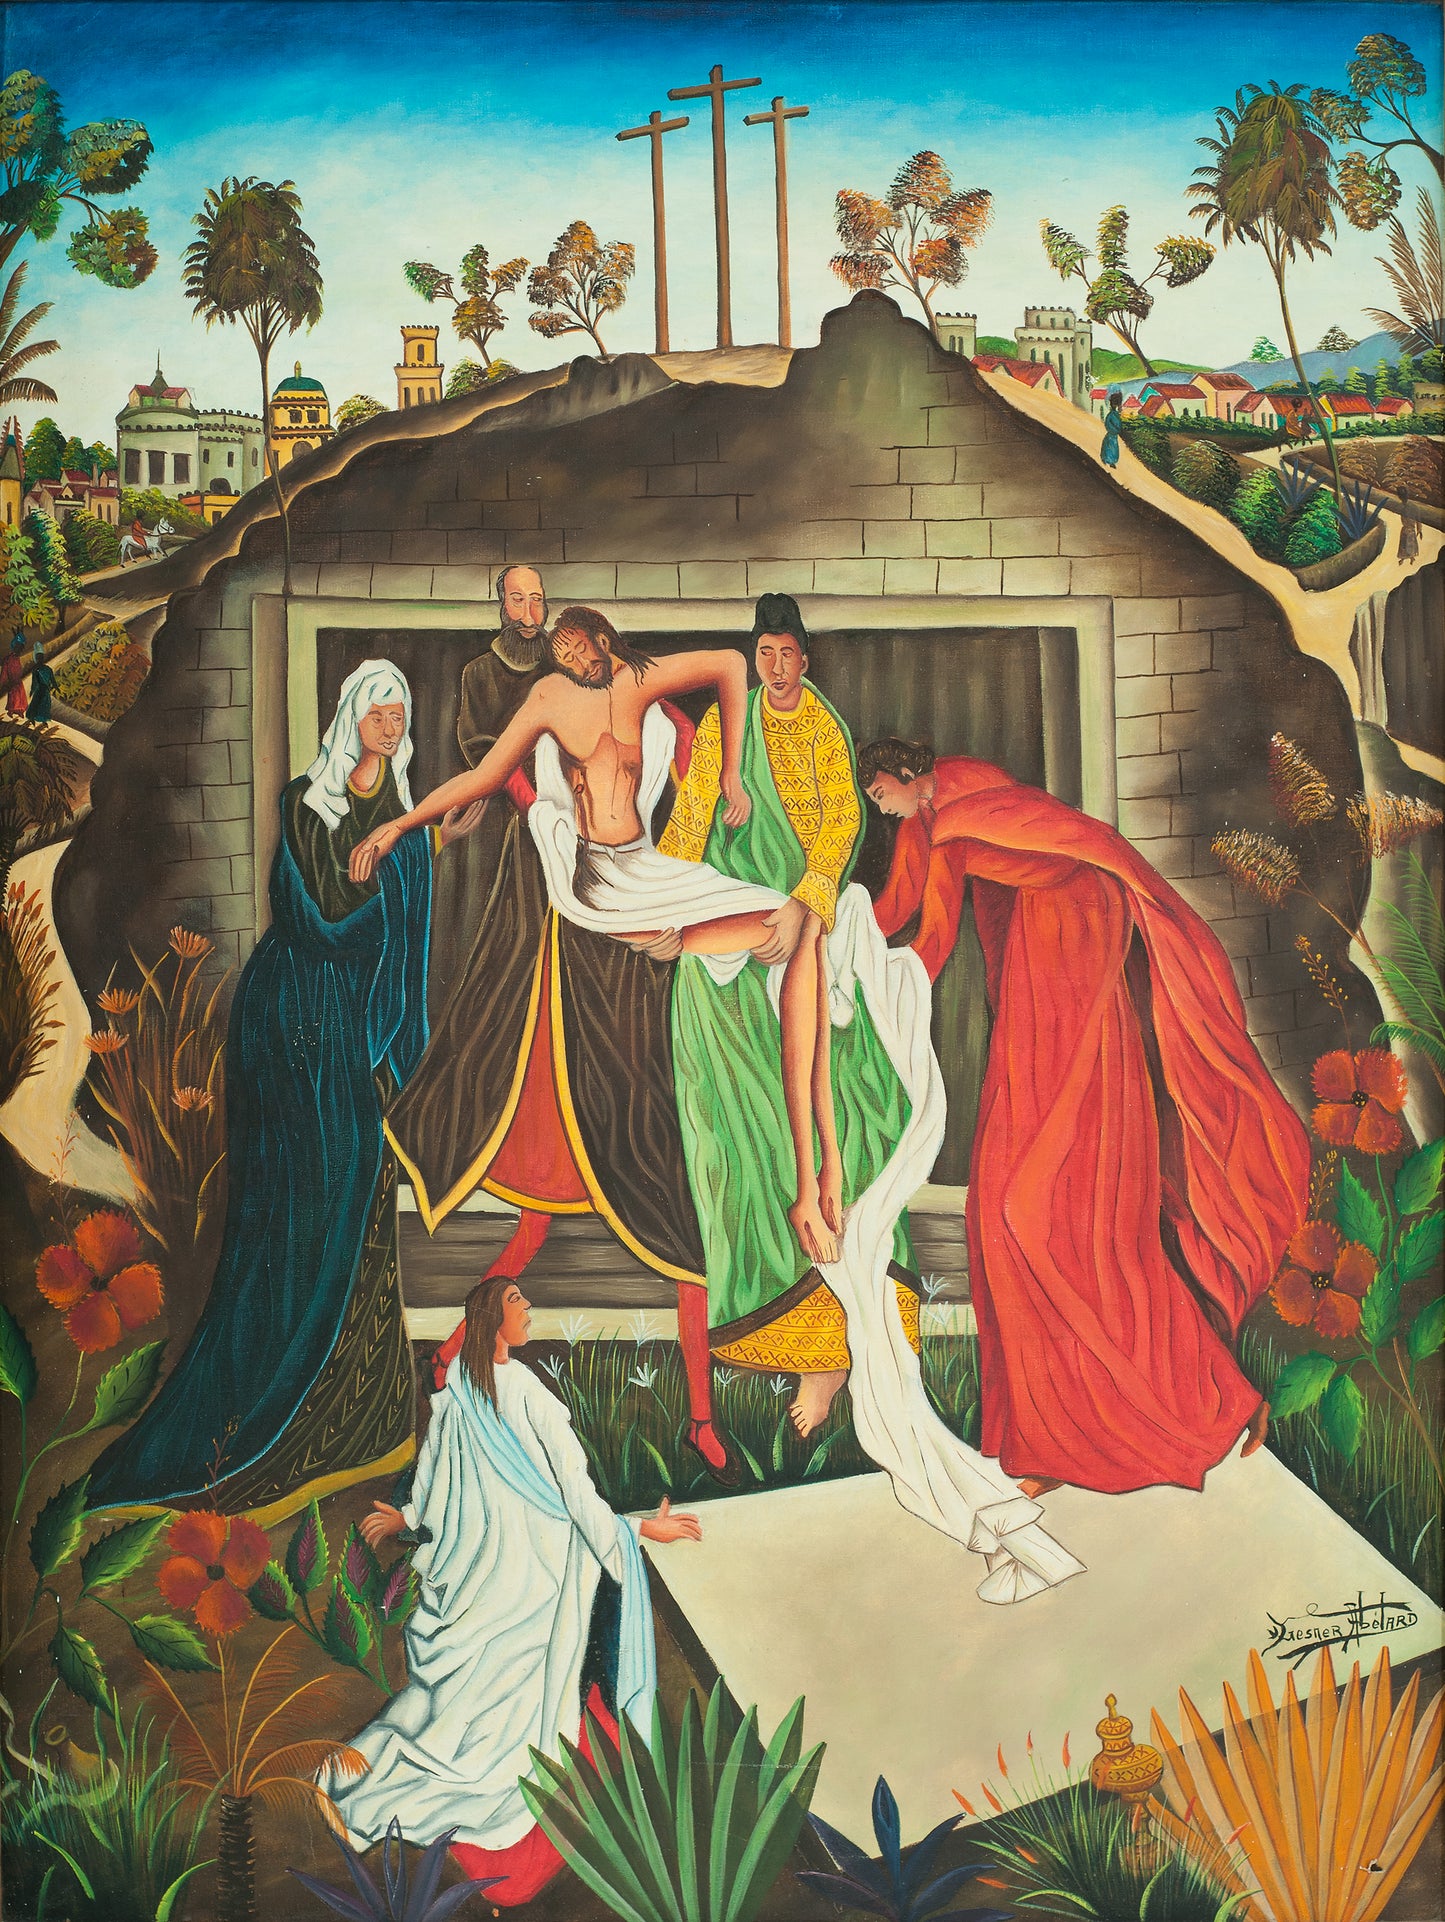 Gesner Abelard (Haitian, 1922-DCD) 48"x36" The Passion of Jesus c1976 Oil on Canvas Unframed Painting #51-3-96GSN-Fondation Marie & Georges S. Nader